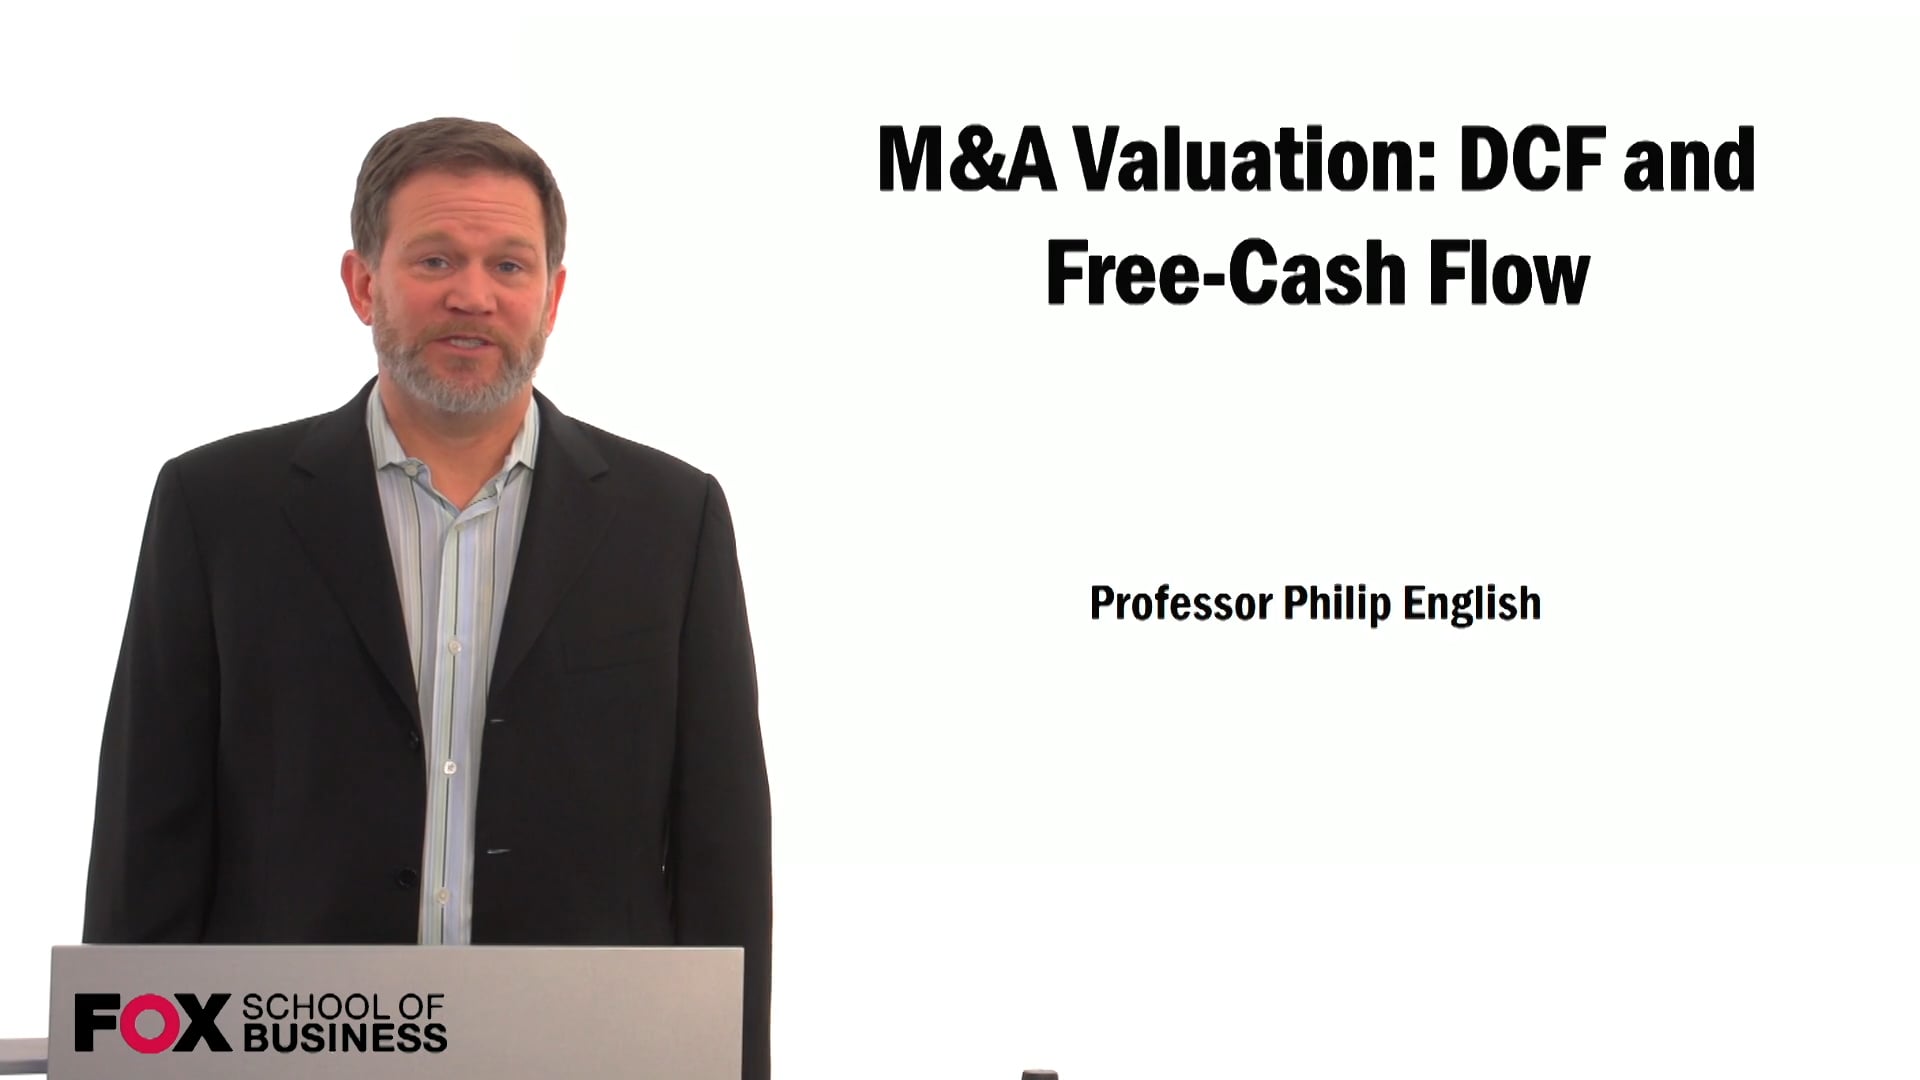 M&A Valuation: DCF and Free-Cash Flow